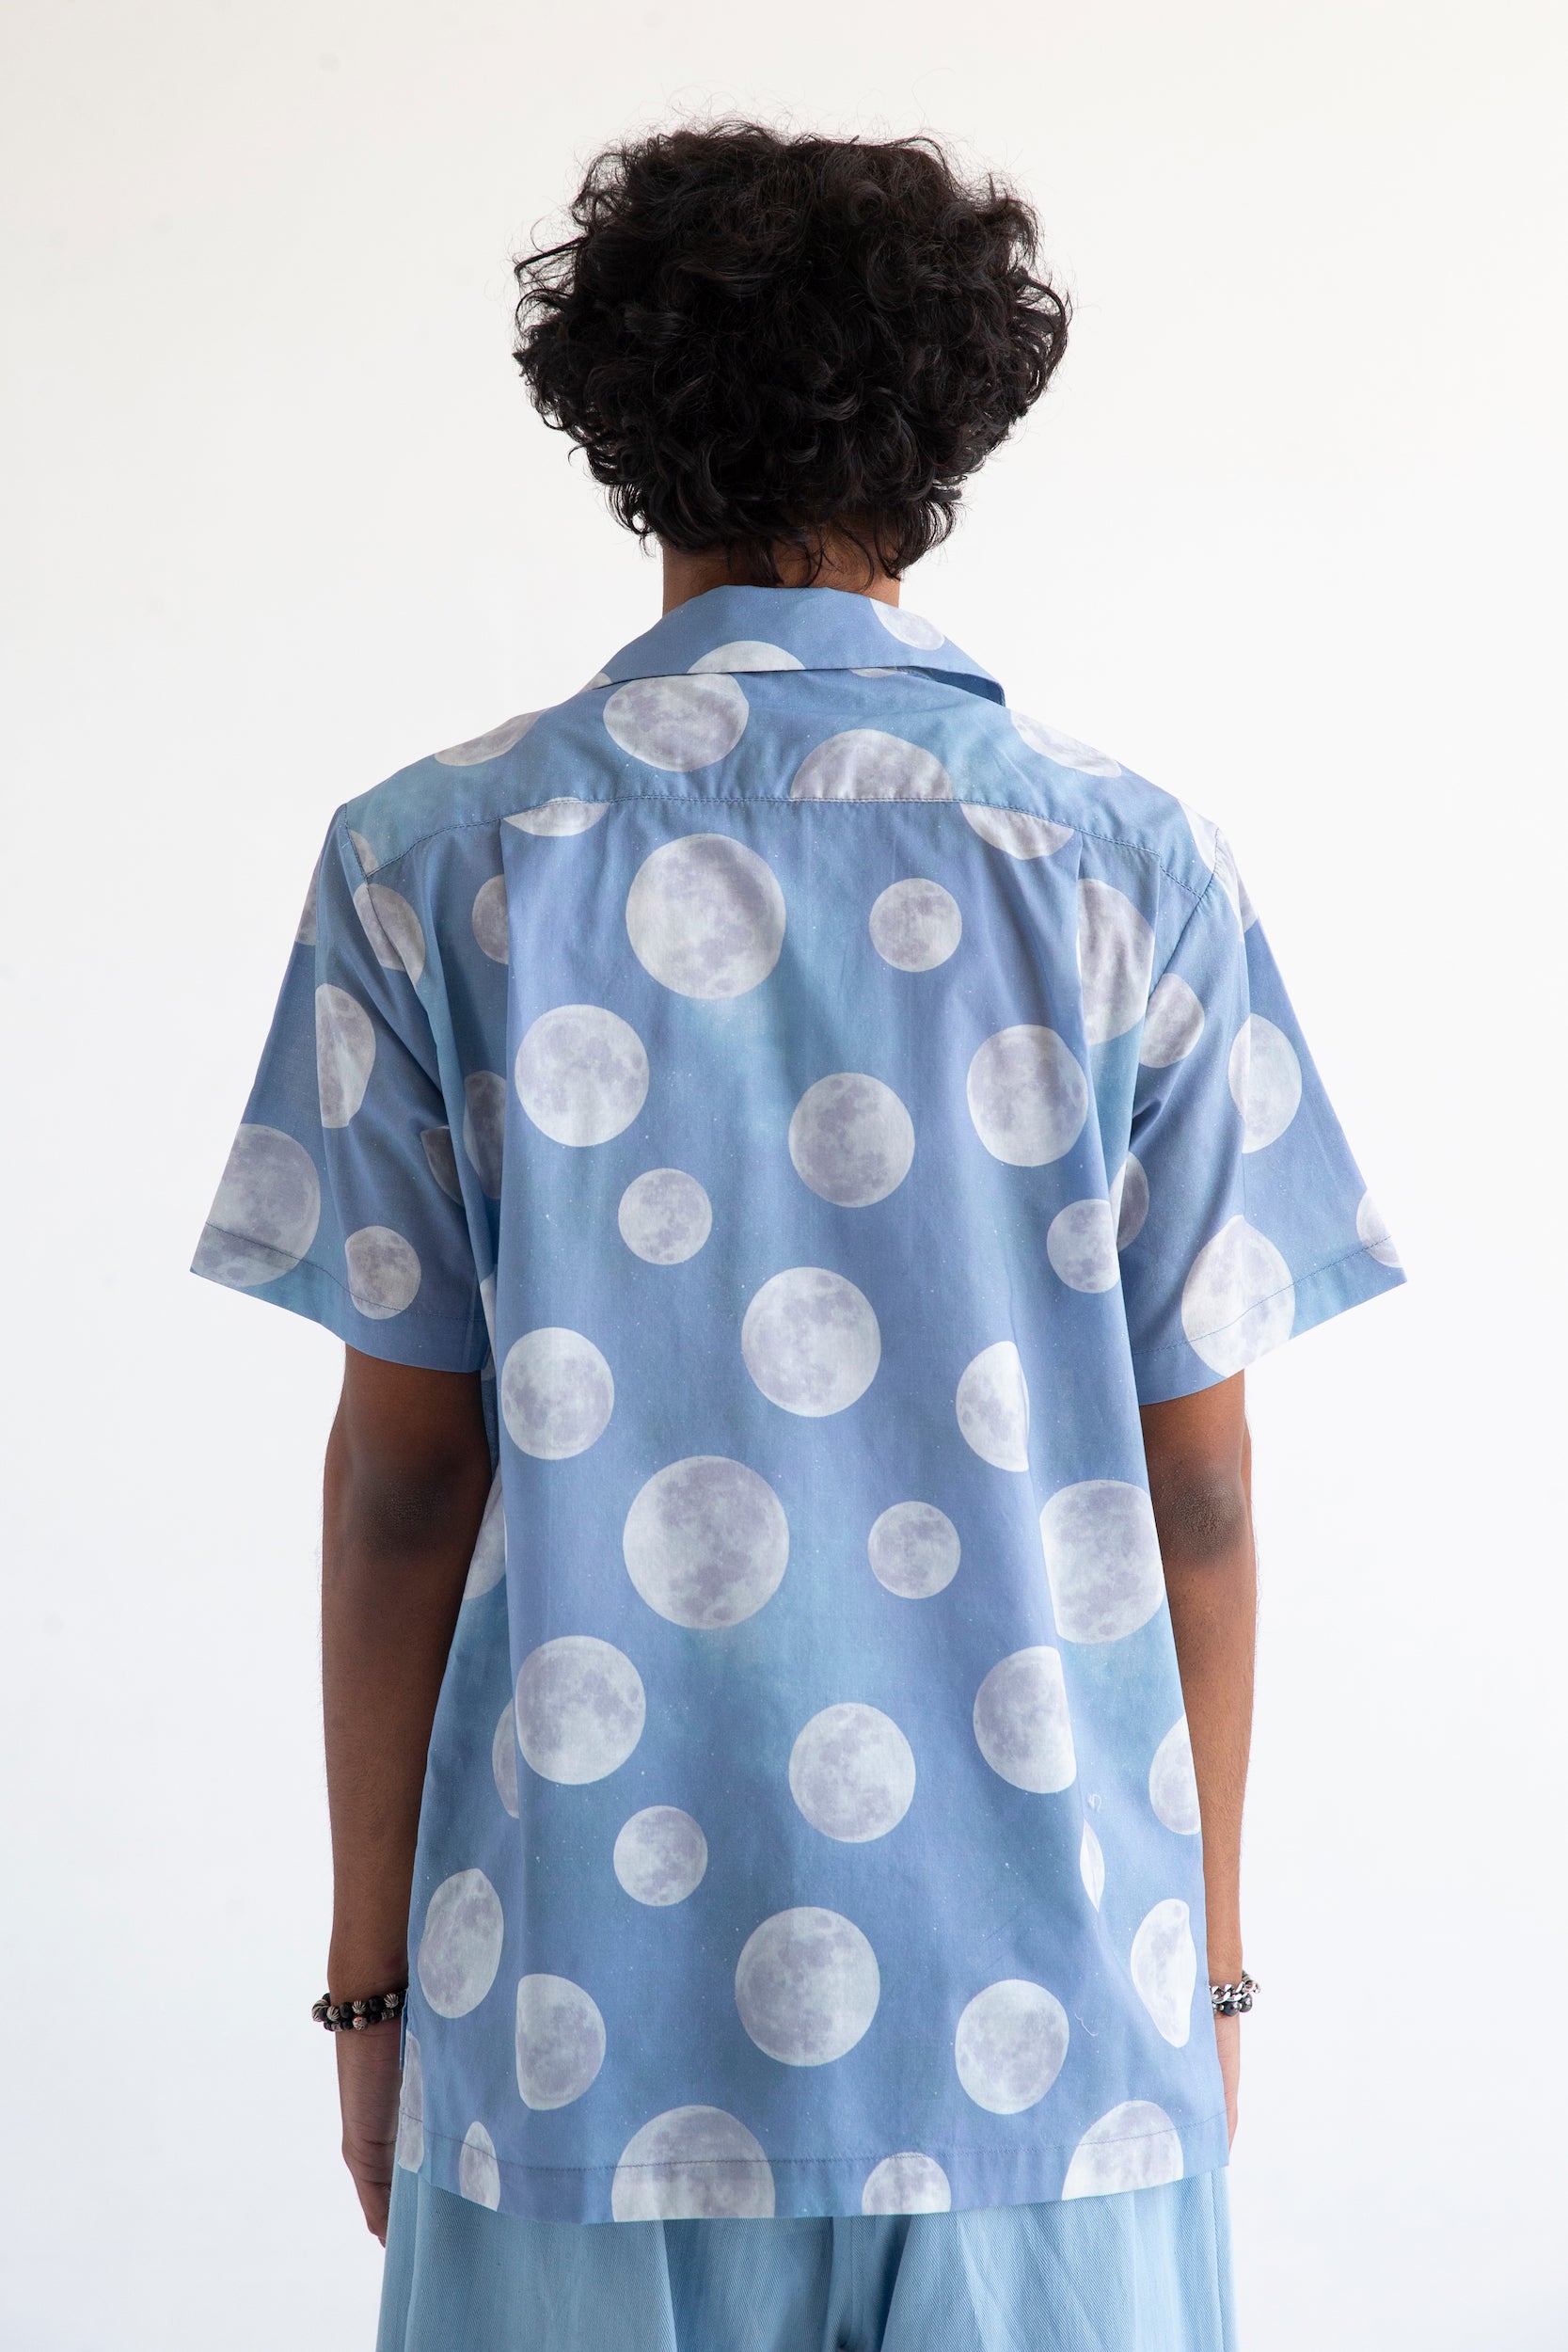 back view of light blue casual shirt with moon print